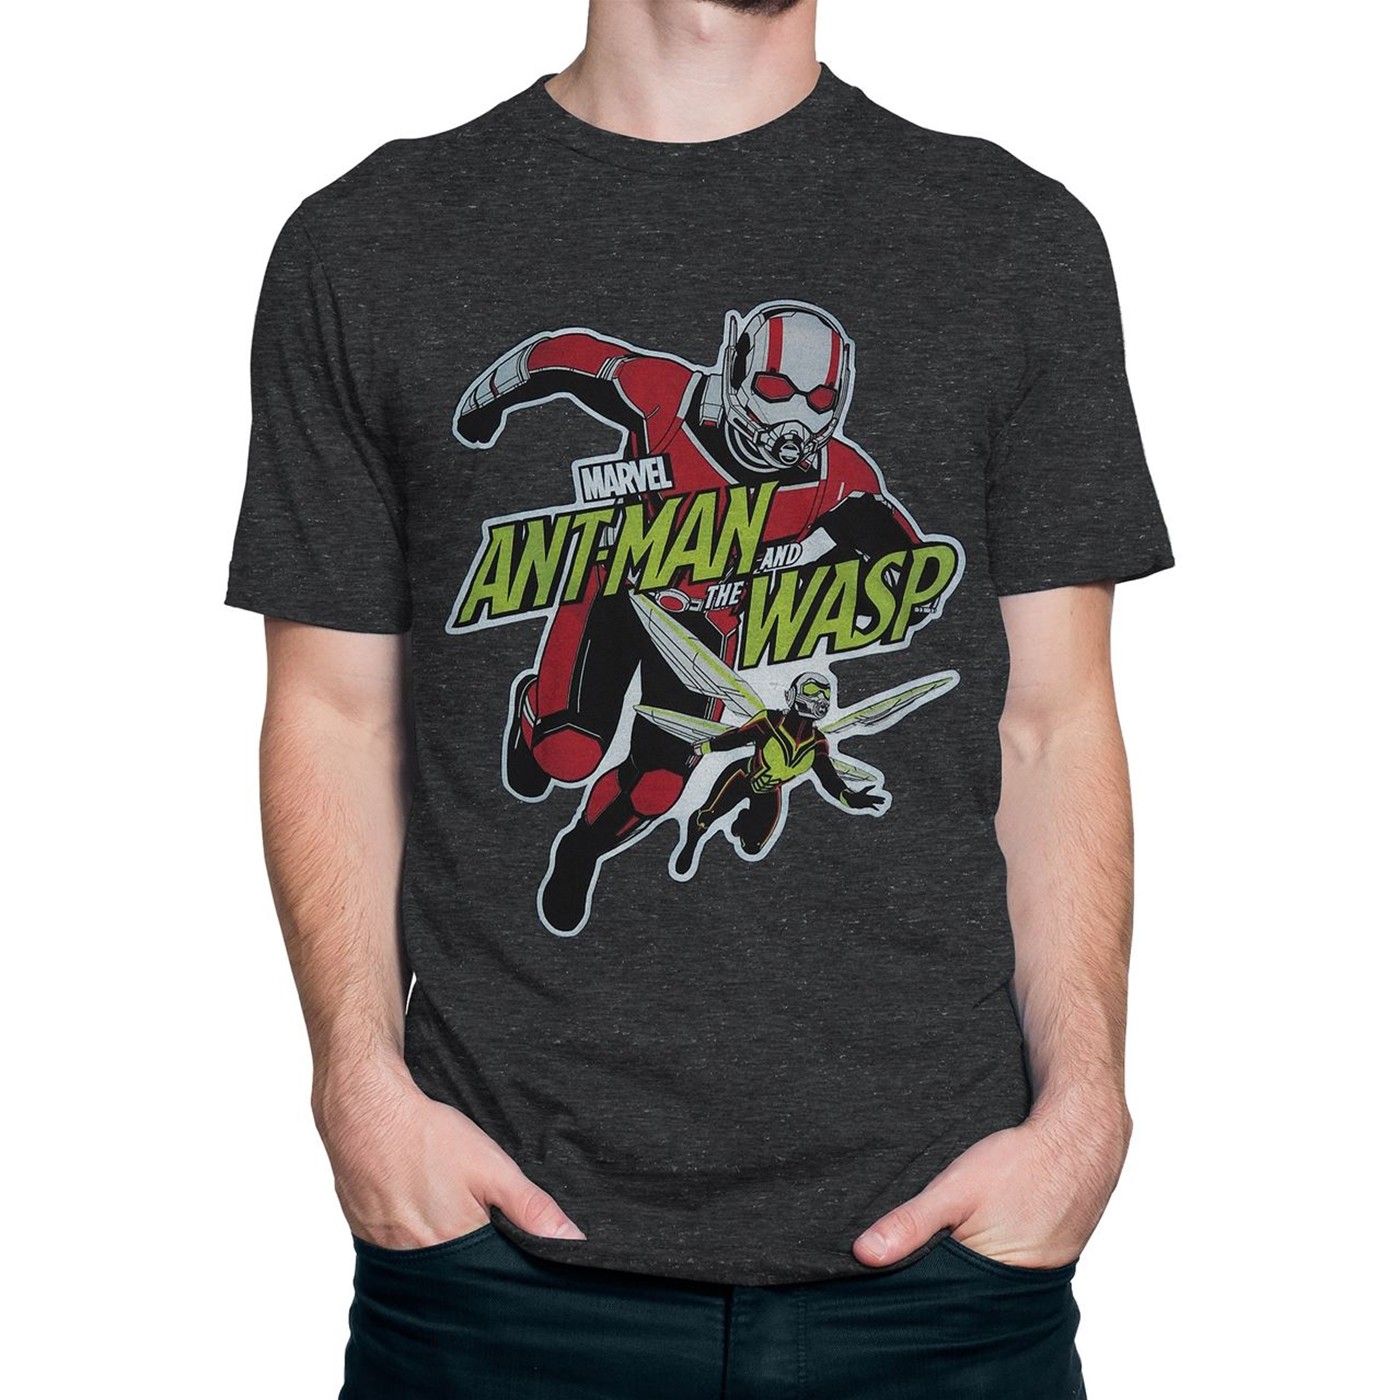 Ant-Man & The Wasp Attack Men's T-Shirt